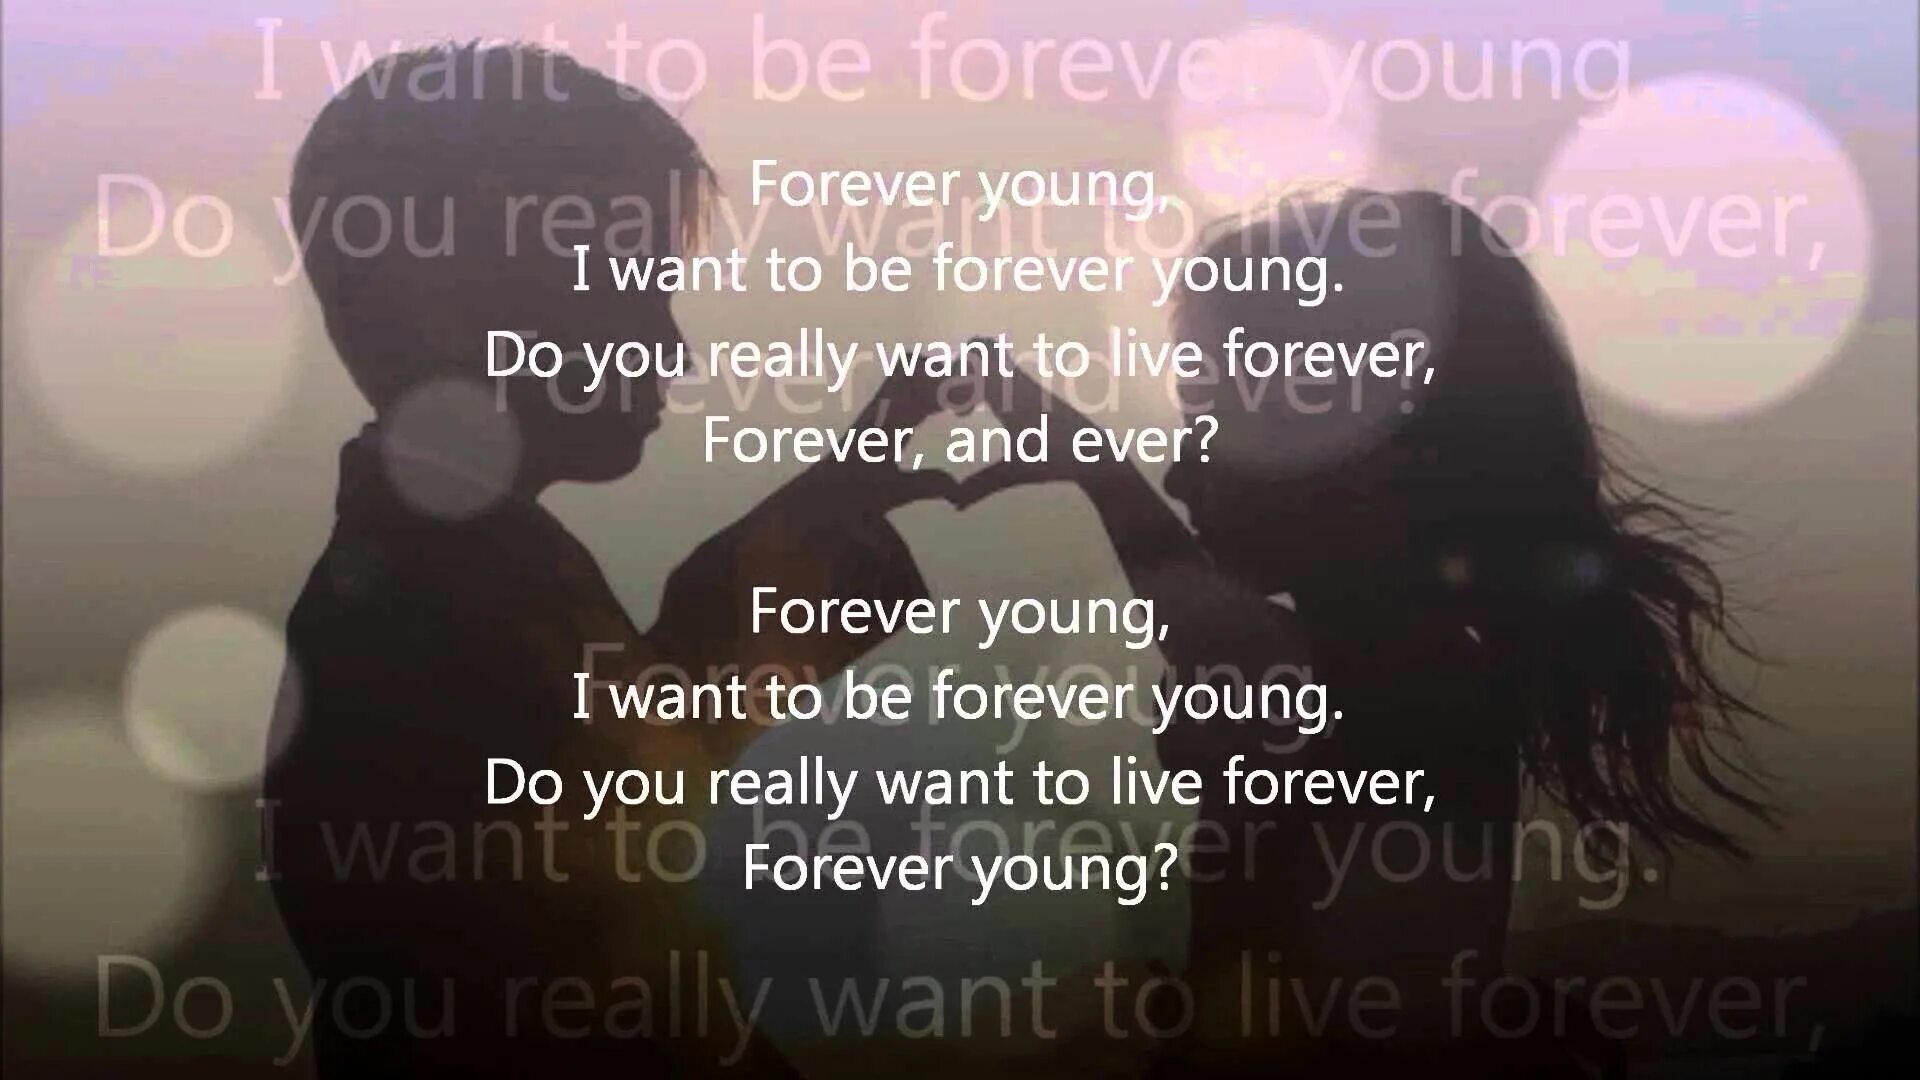 Нужна текст янг. I wanna be Forever young. Forever young Alphaville Lyrics. I wanna be Forever young Alphaville. Forever young i want to be Forever young.